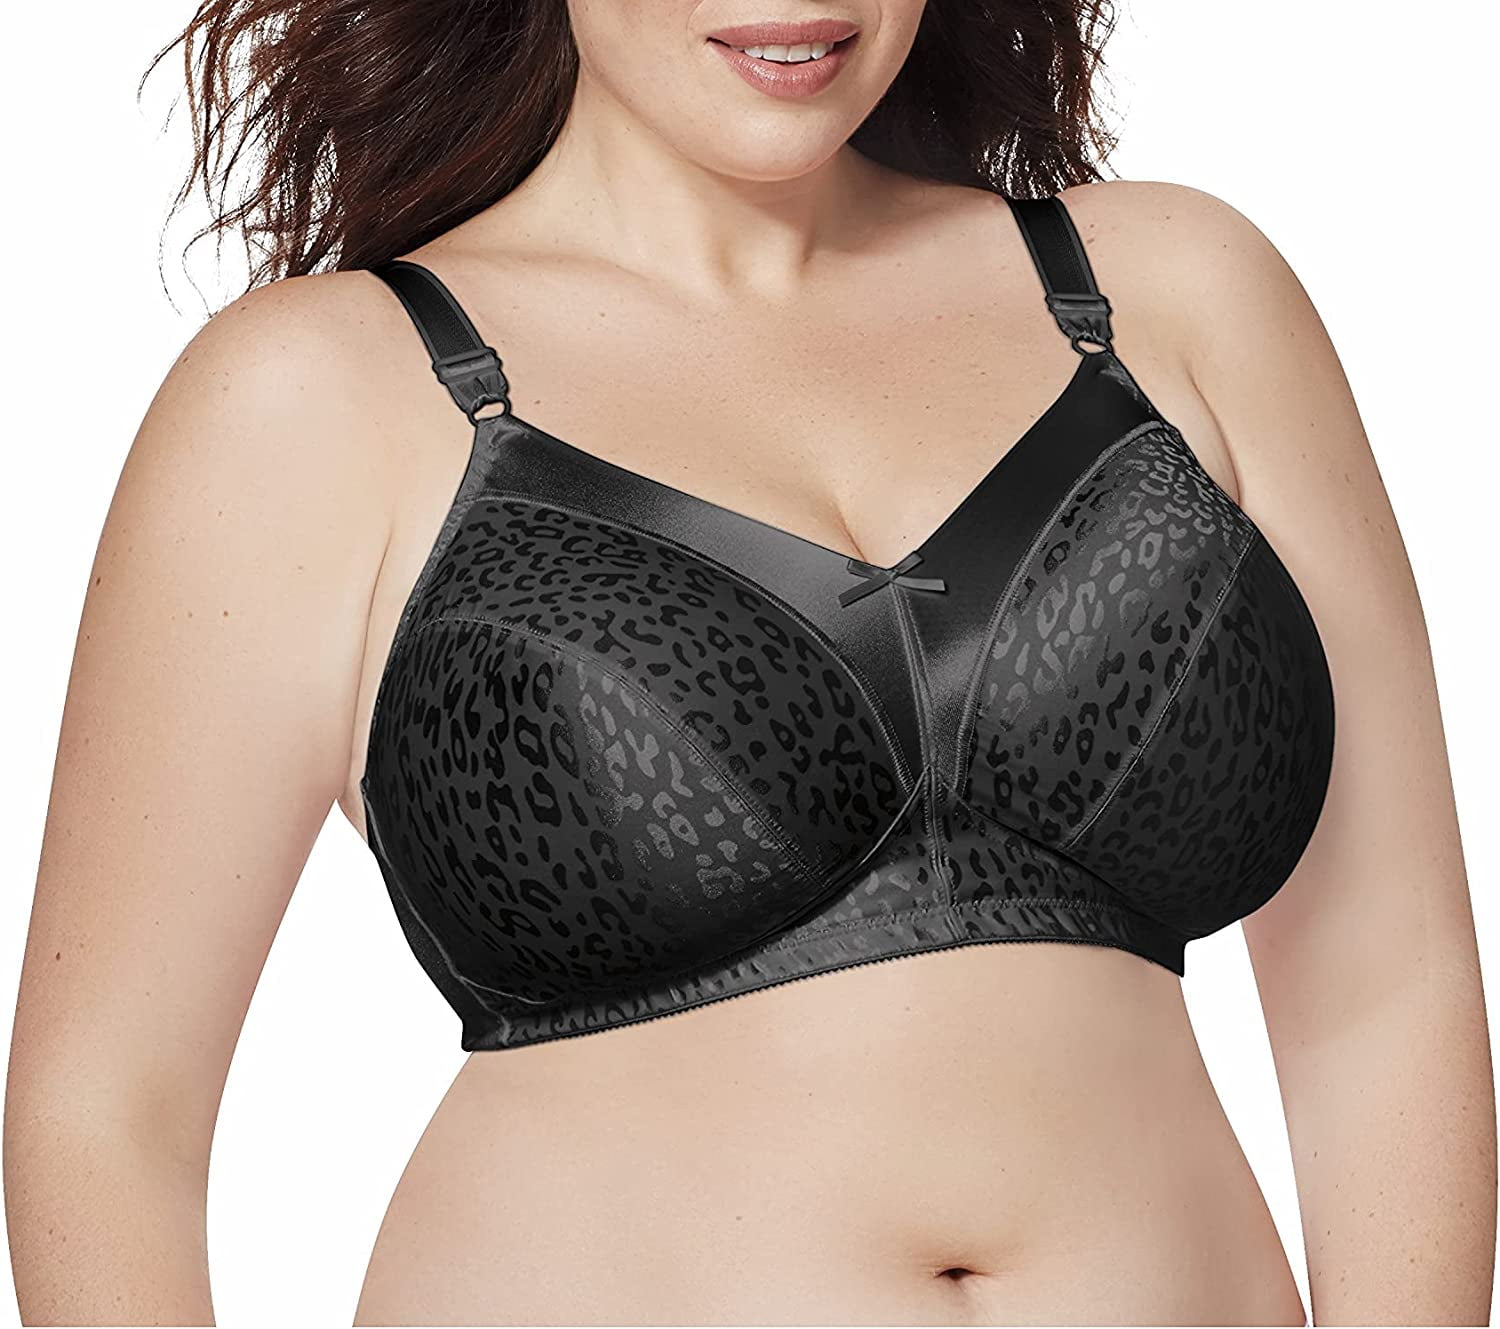 Just My Size Wireless Bra Pack, Full Coverage, Leopard Satin, Wirefree  Plus-Size Bra, (Sizes from 32C to 50DD) 